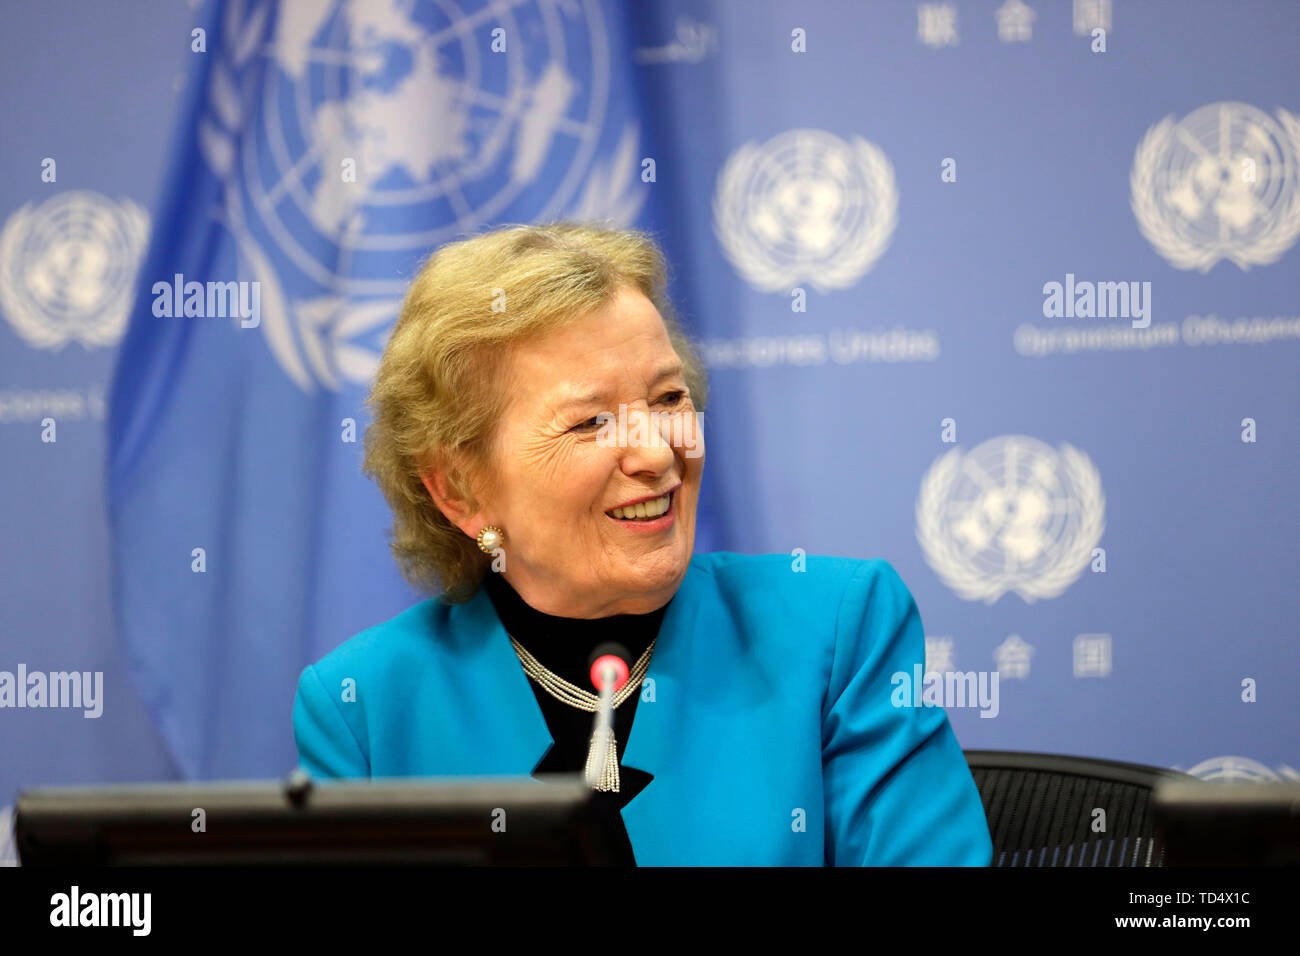 (190612) -- UNITED NATIONS, June 12, 2019 (Xinhua) -- Mary Robinson, chair of The Elders, reacts during a press briefing at the UN headquarters in New York, June 11, 2019. Mary Robinson warned on Tuesday against a nuclear fiasco, as due attention is not being paid to the issue. 'We are nearer to the Doomsday Clock (midnight) than we have ever been, and yet somehow it is not an issue that has taken hold in people's sense of what are the pending crises in our world,' she said, referring to a symbol that represents the likelihood of a man-made global catastrophe. (Xinhua/Li Muzi) Stock Photo